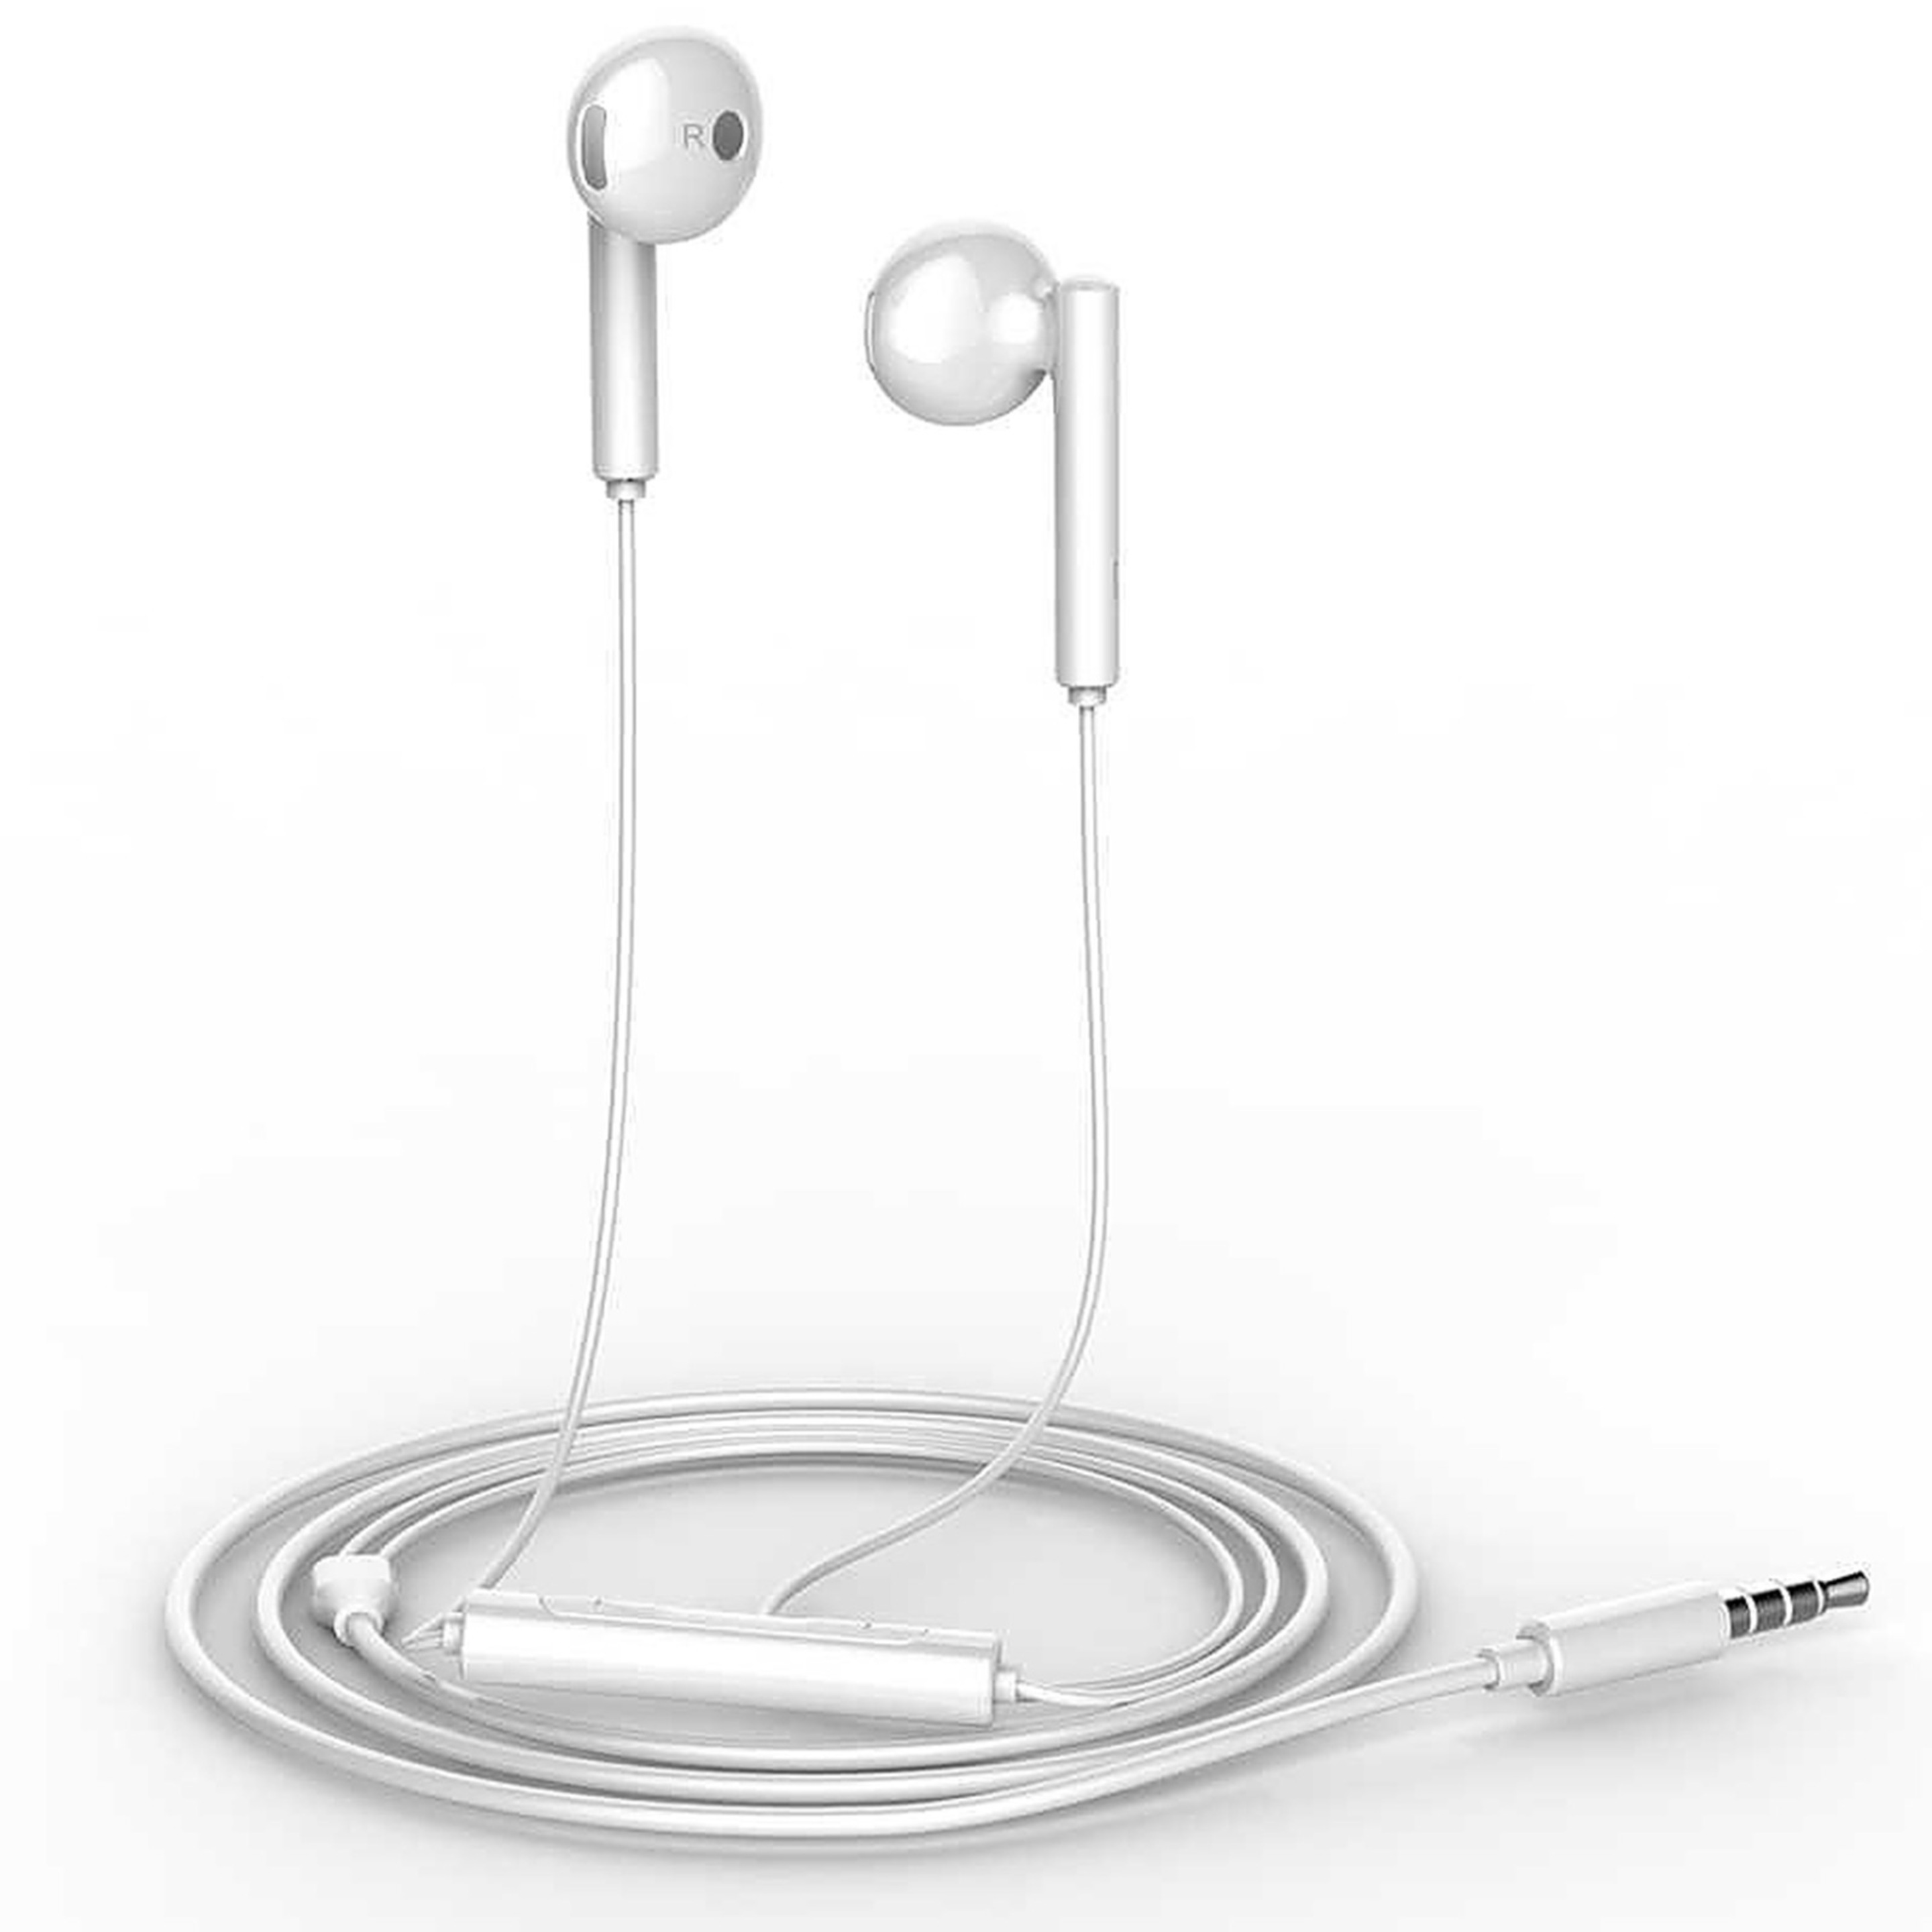 Auriculares Oficiales Huawei Am115s - blanco - 